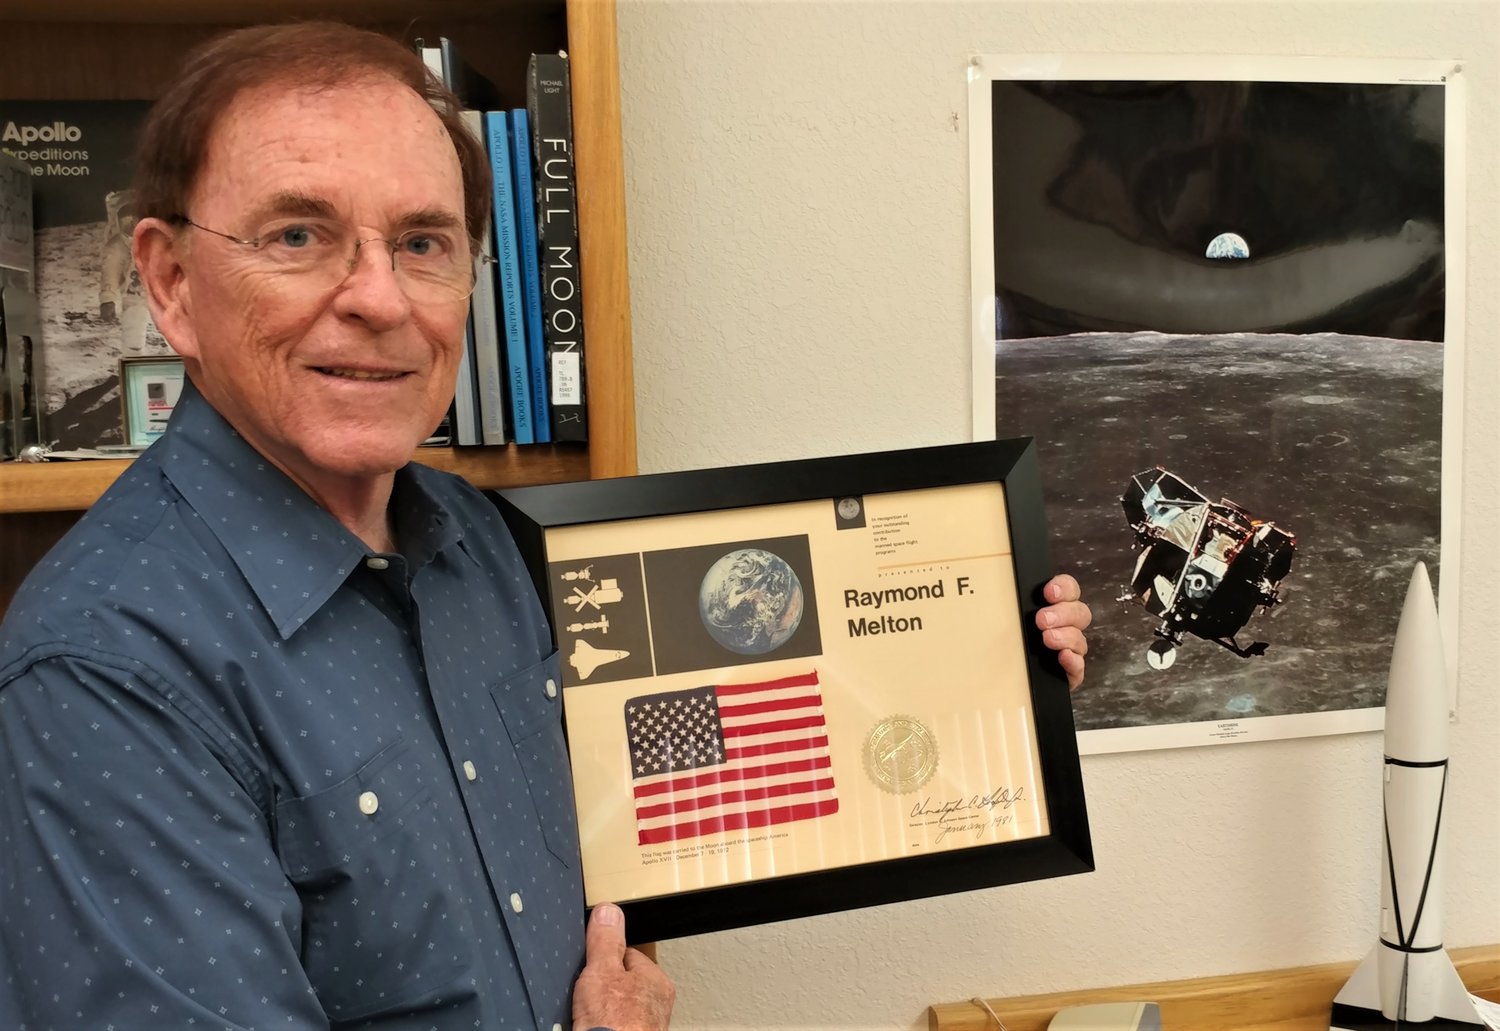 Retired NASA engineer Ray Melton with the small U.S. flag he received after it was flown to the Moon and back aboard Apollo 17, the final Apollo mission.